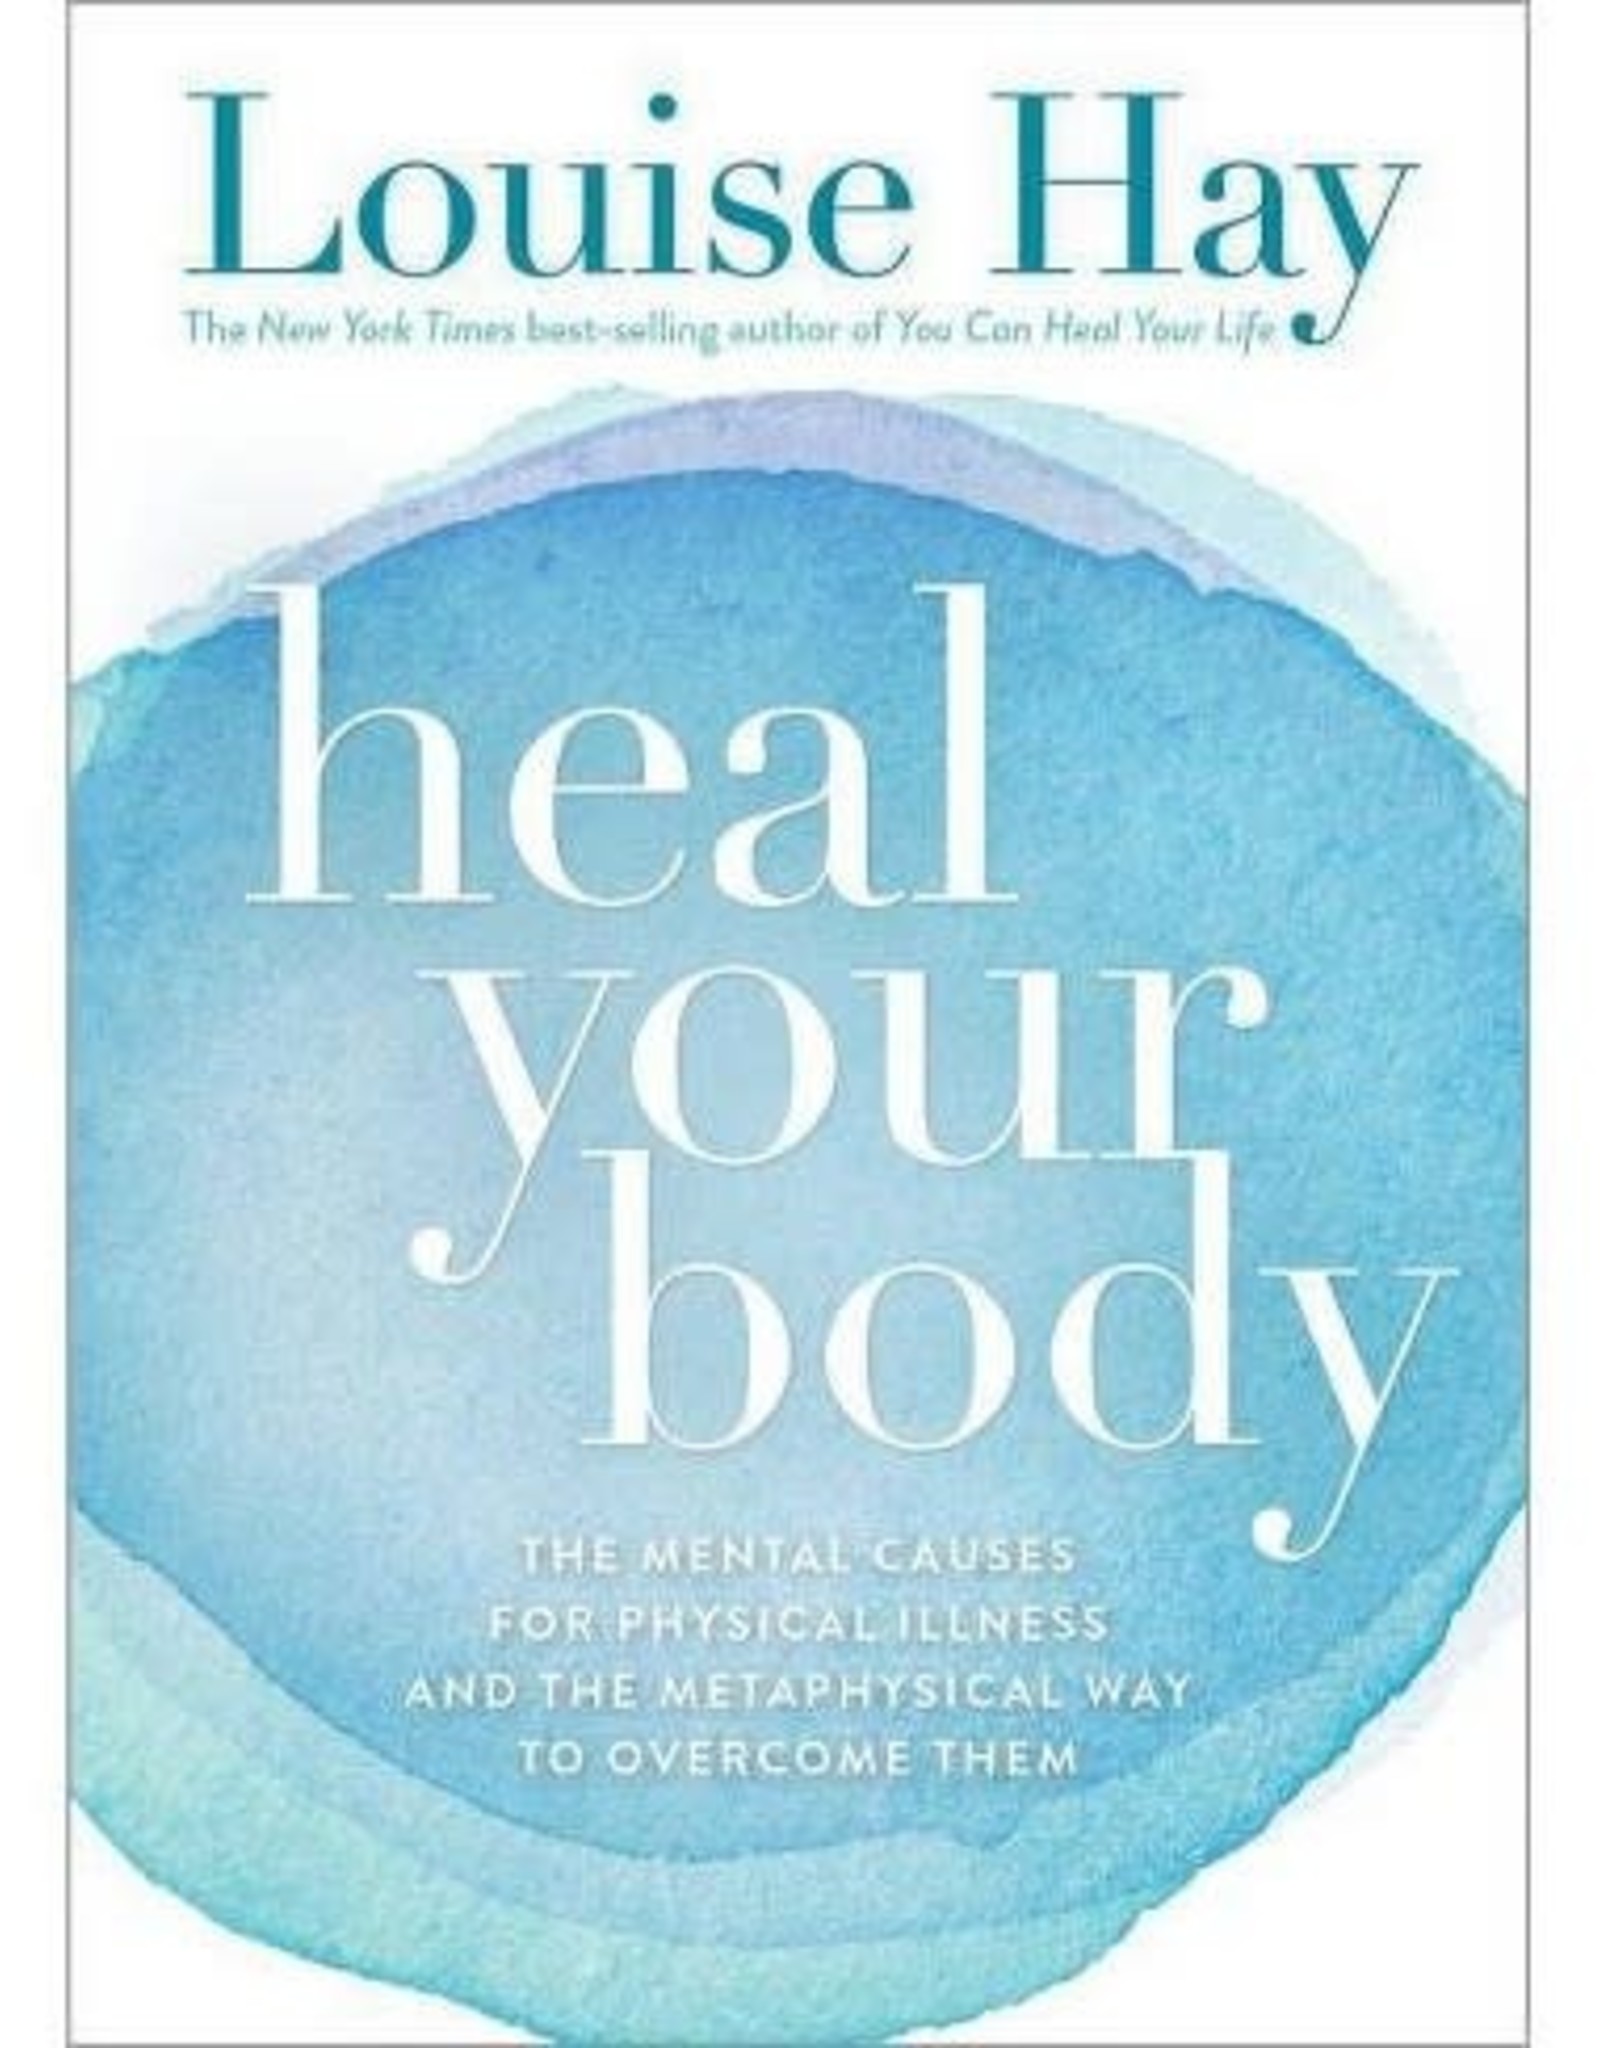 Louise Hay Heal Your Body by Louise Hay